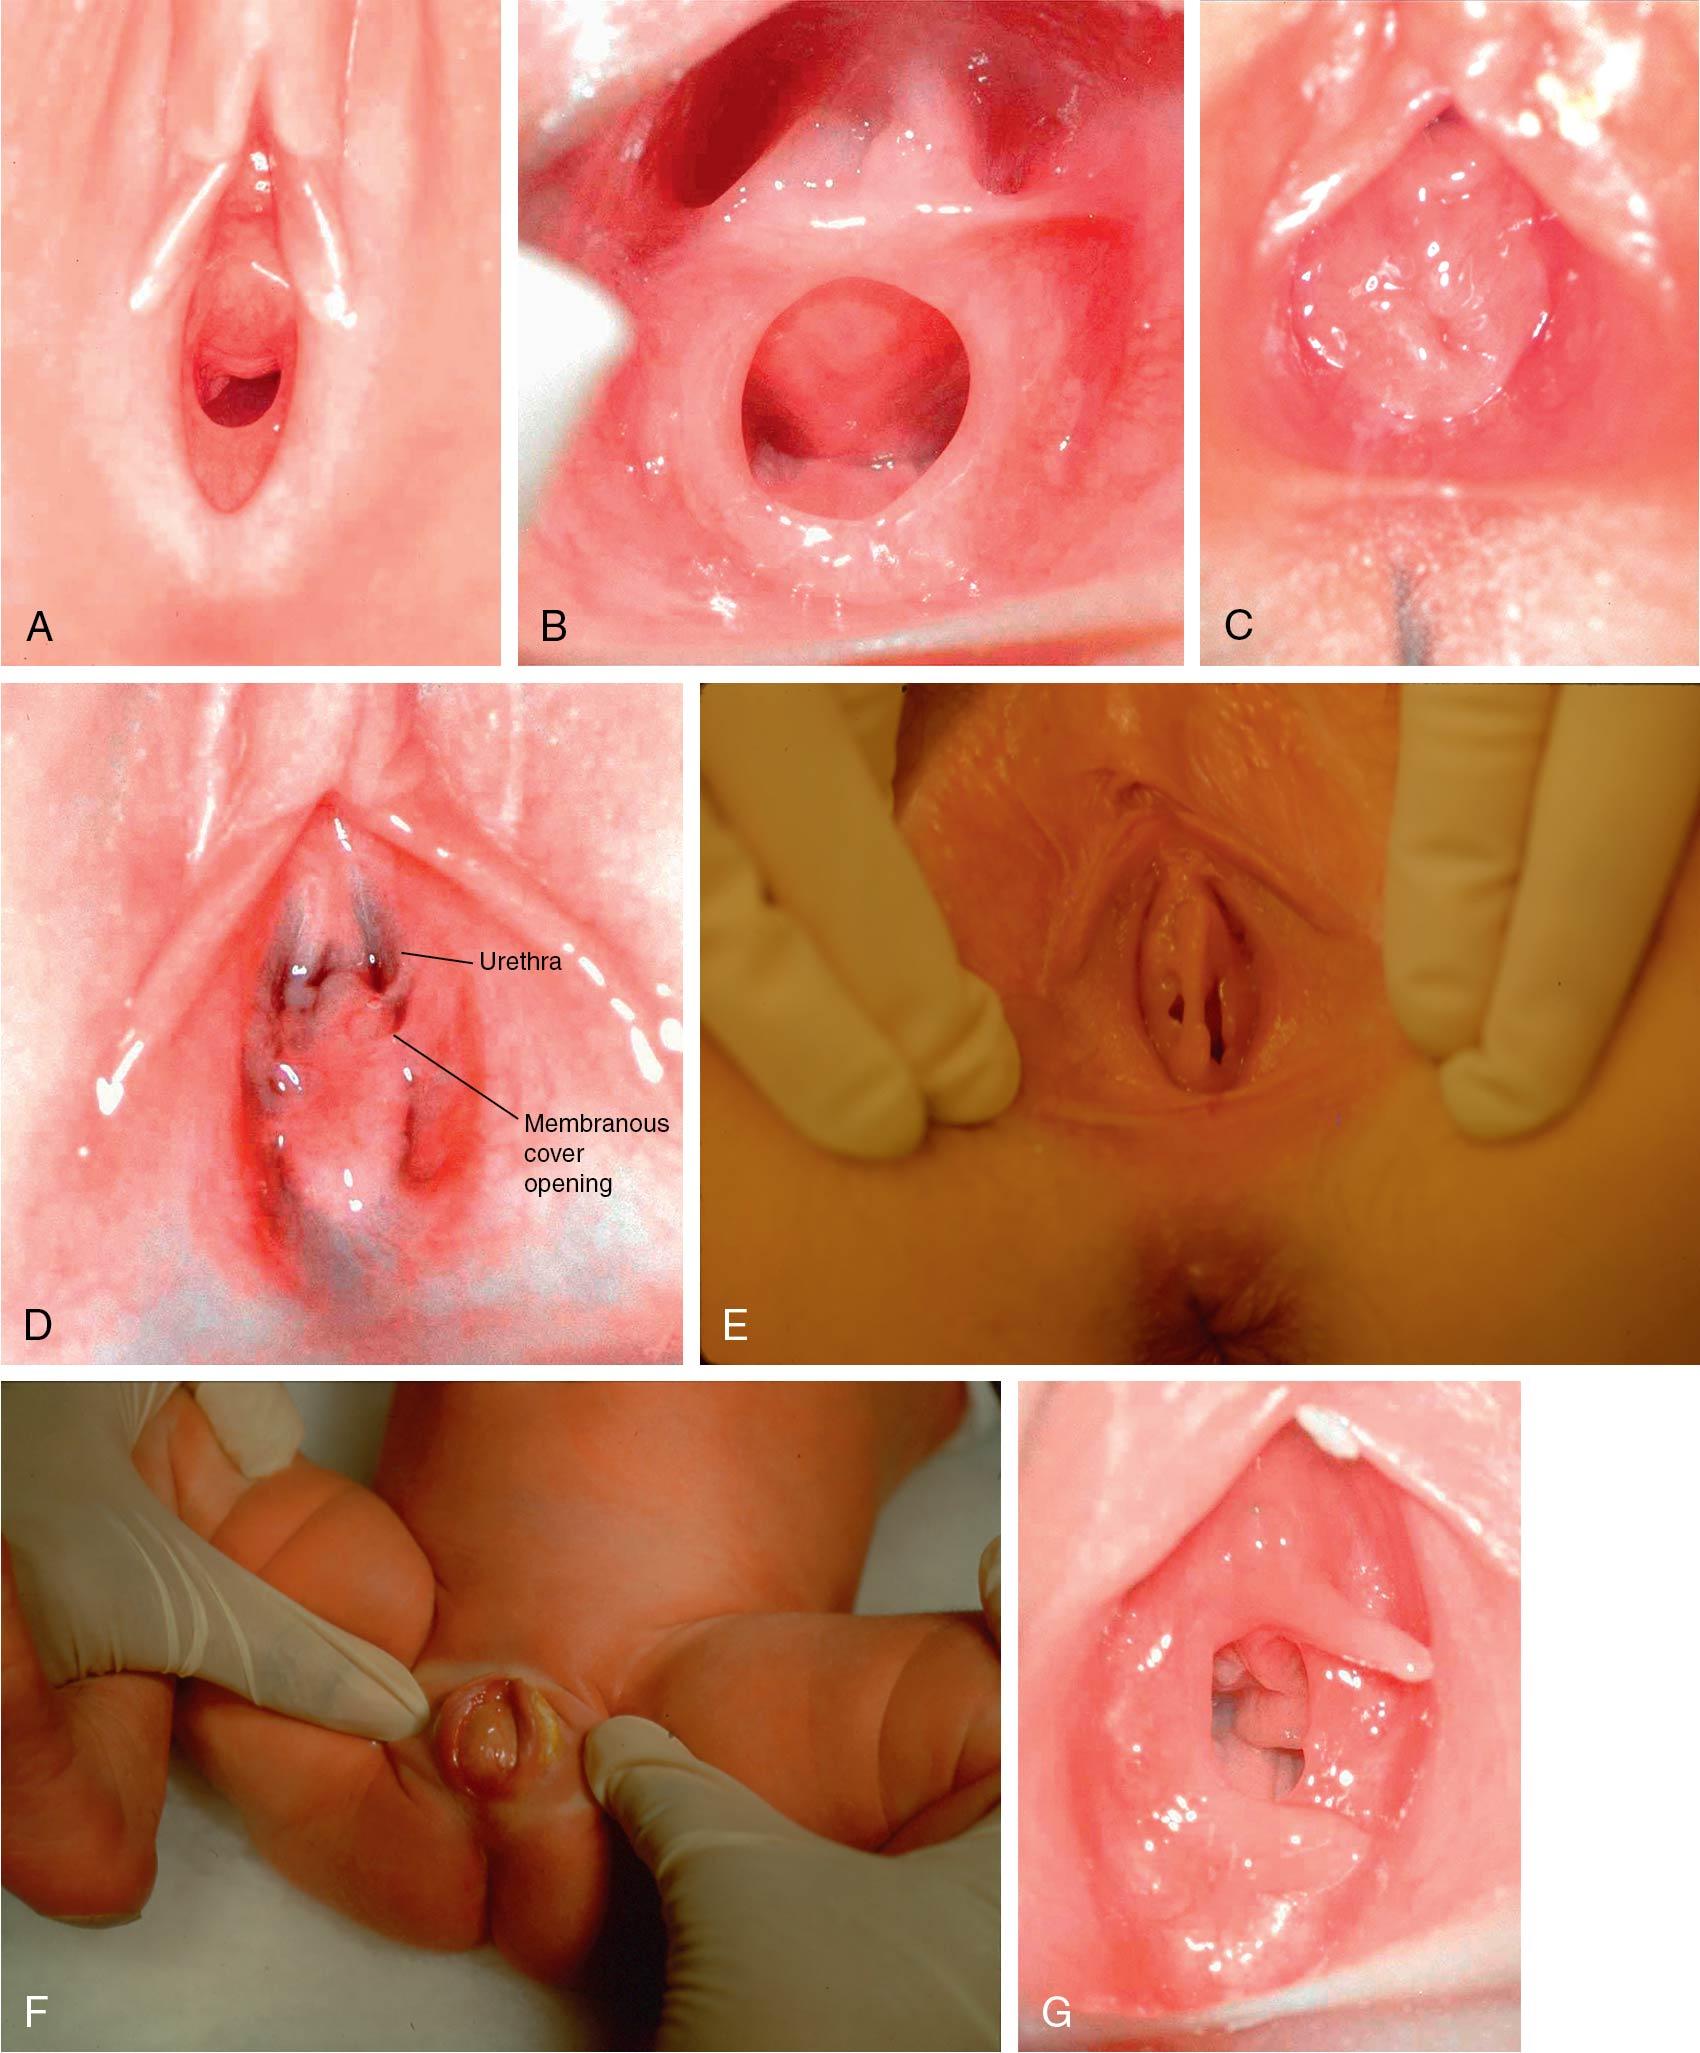 Fig. 12.3, Types of hymens. A, Crescentic. B, Annular. C, Redundant. D, Microperforate. E, Septated. F, Imperforate. G, Hymeneal tags.